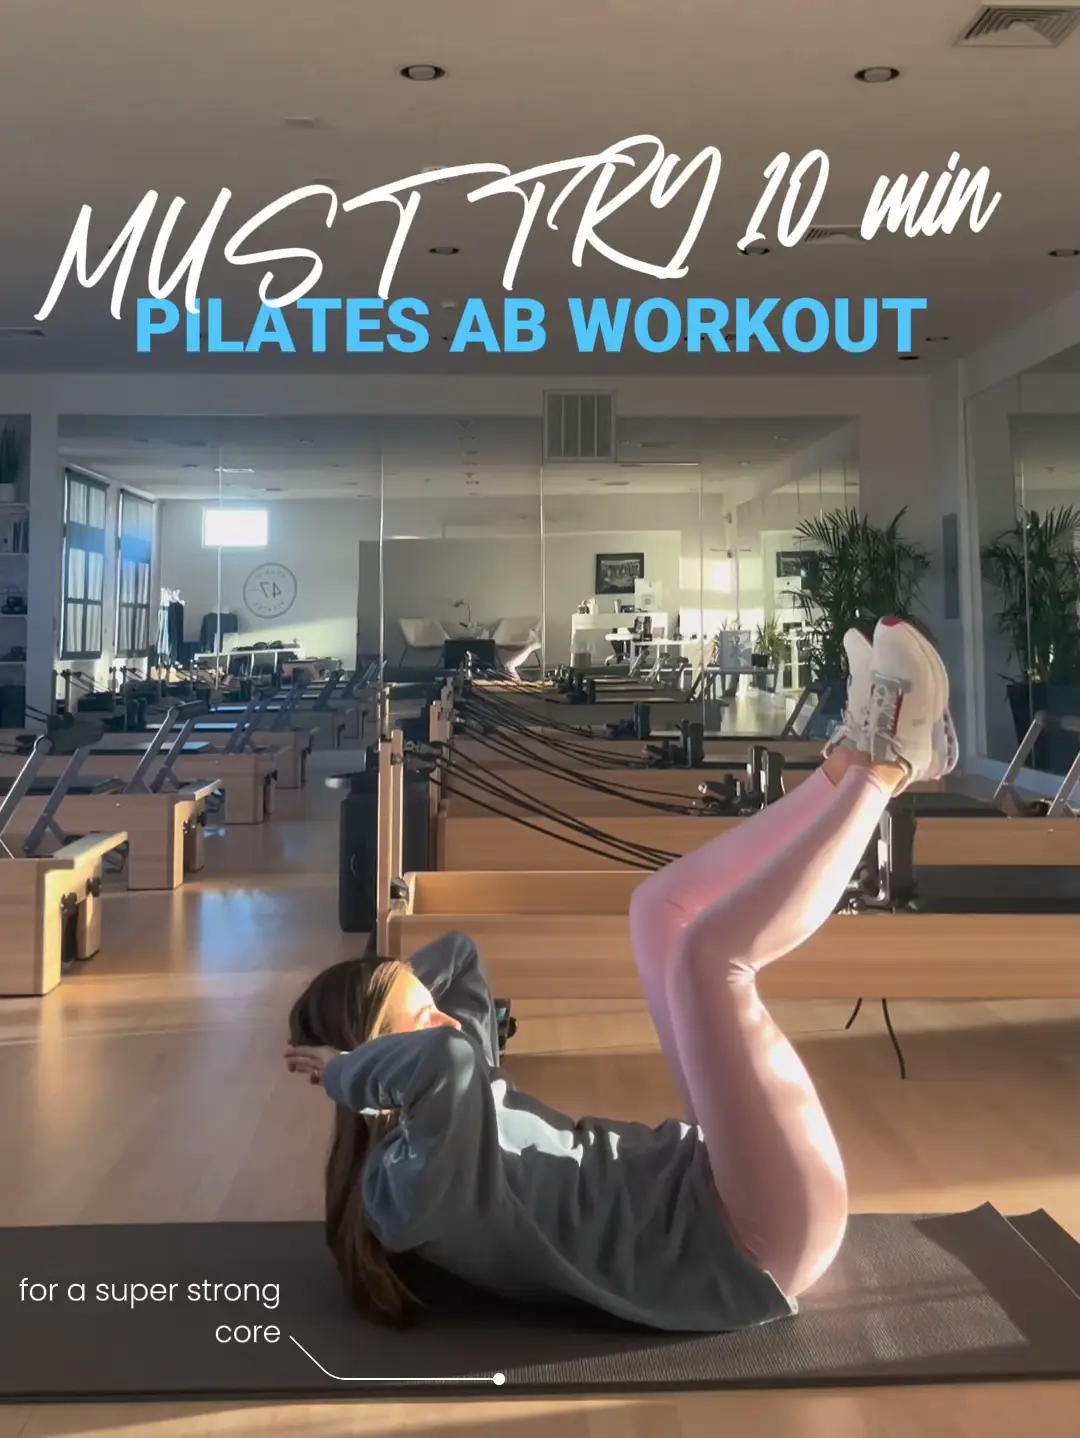 Firing up that core with a short box abs set… 🔥 #pilates